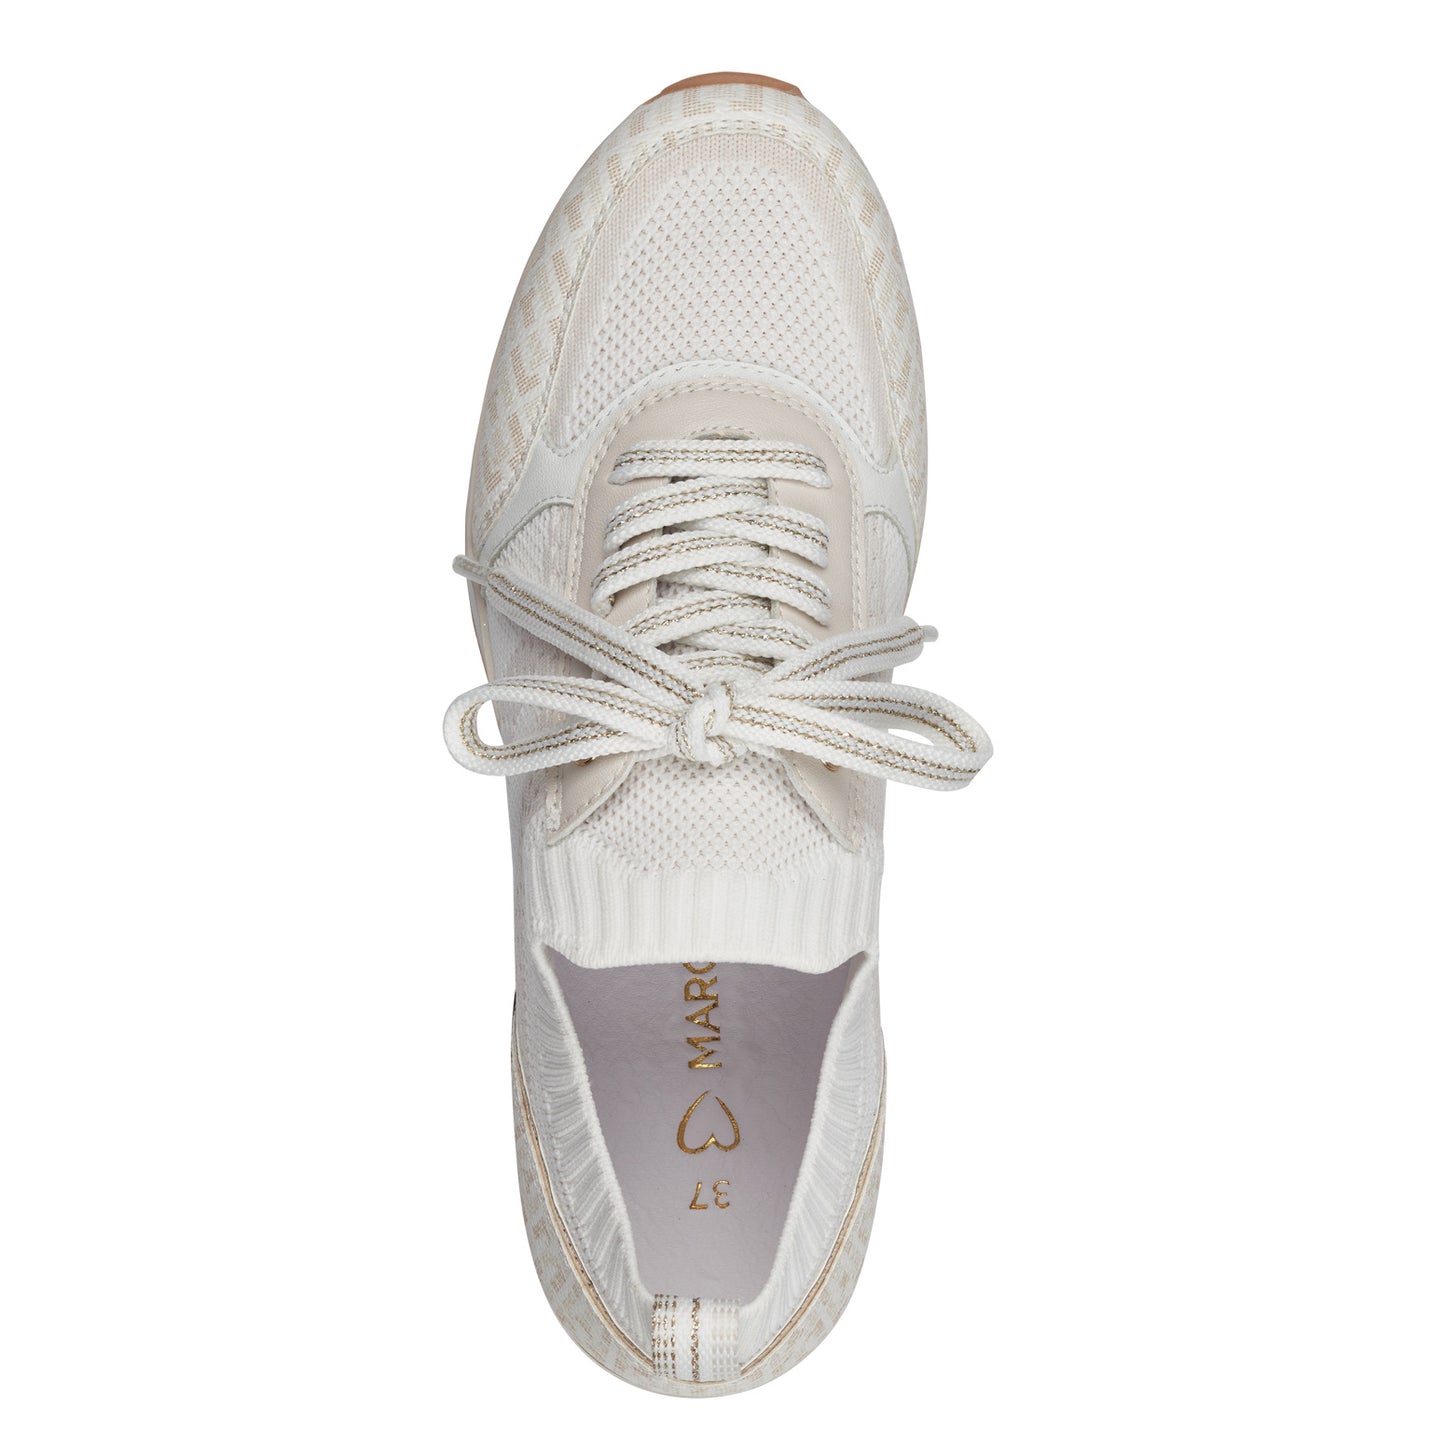 Marco Tozzi - Ladies Shoes Trainers Cream, Gold (2385)